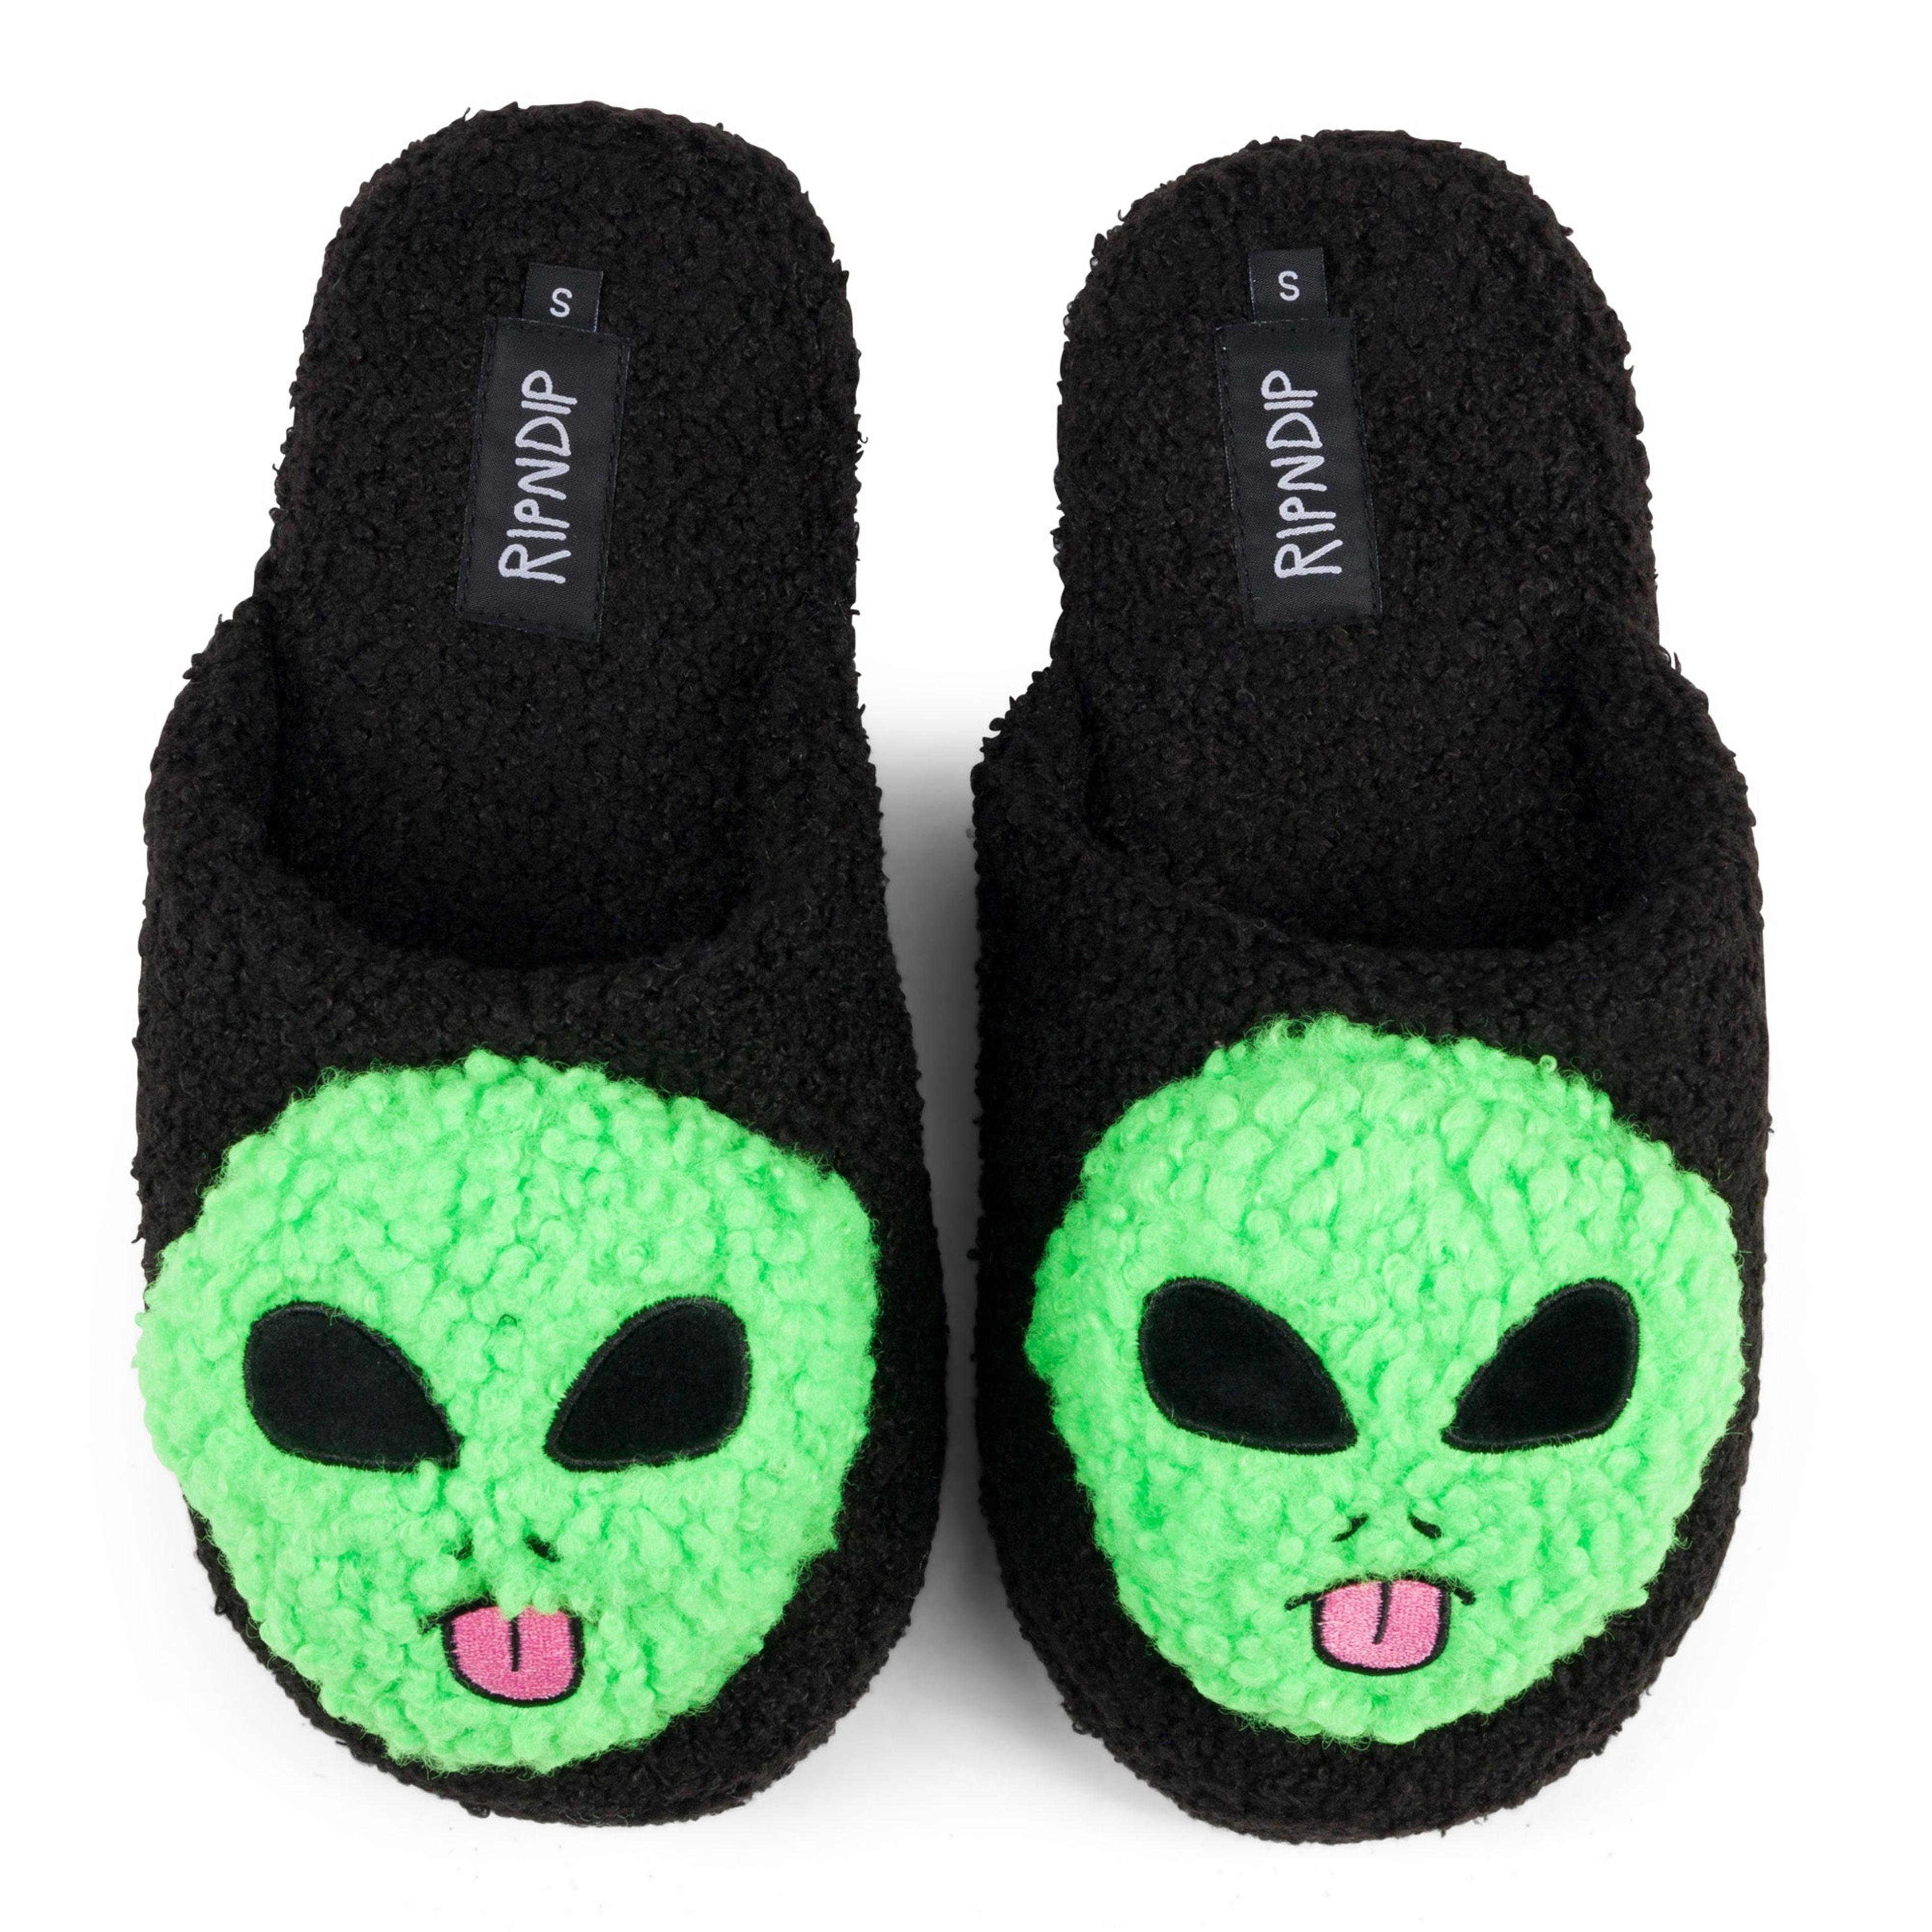 Alternate View 2 of Lord Alien Plush Face House Slippers (Black)